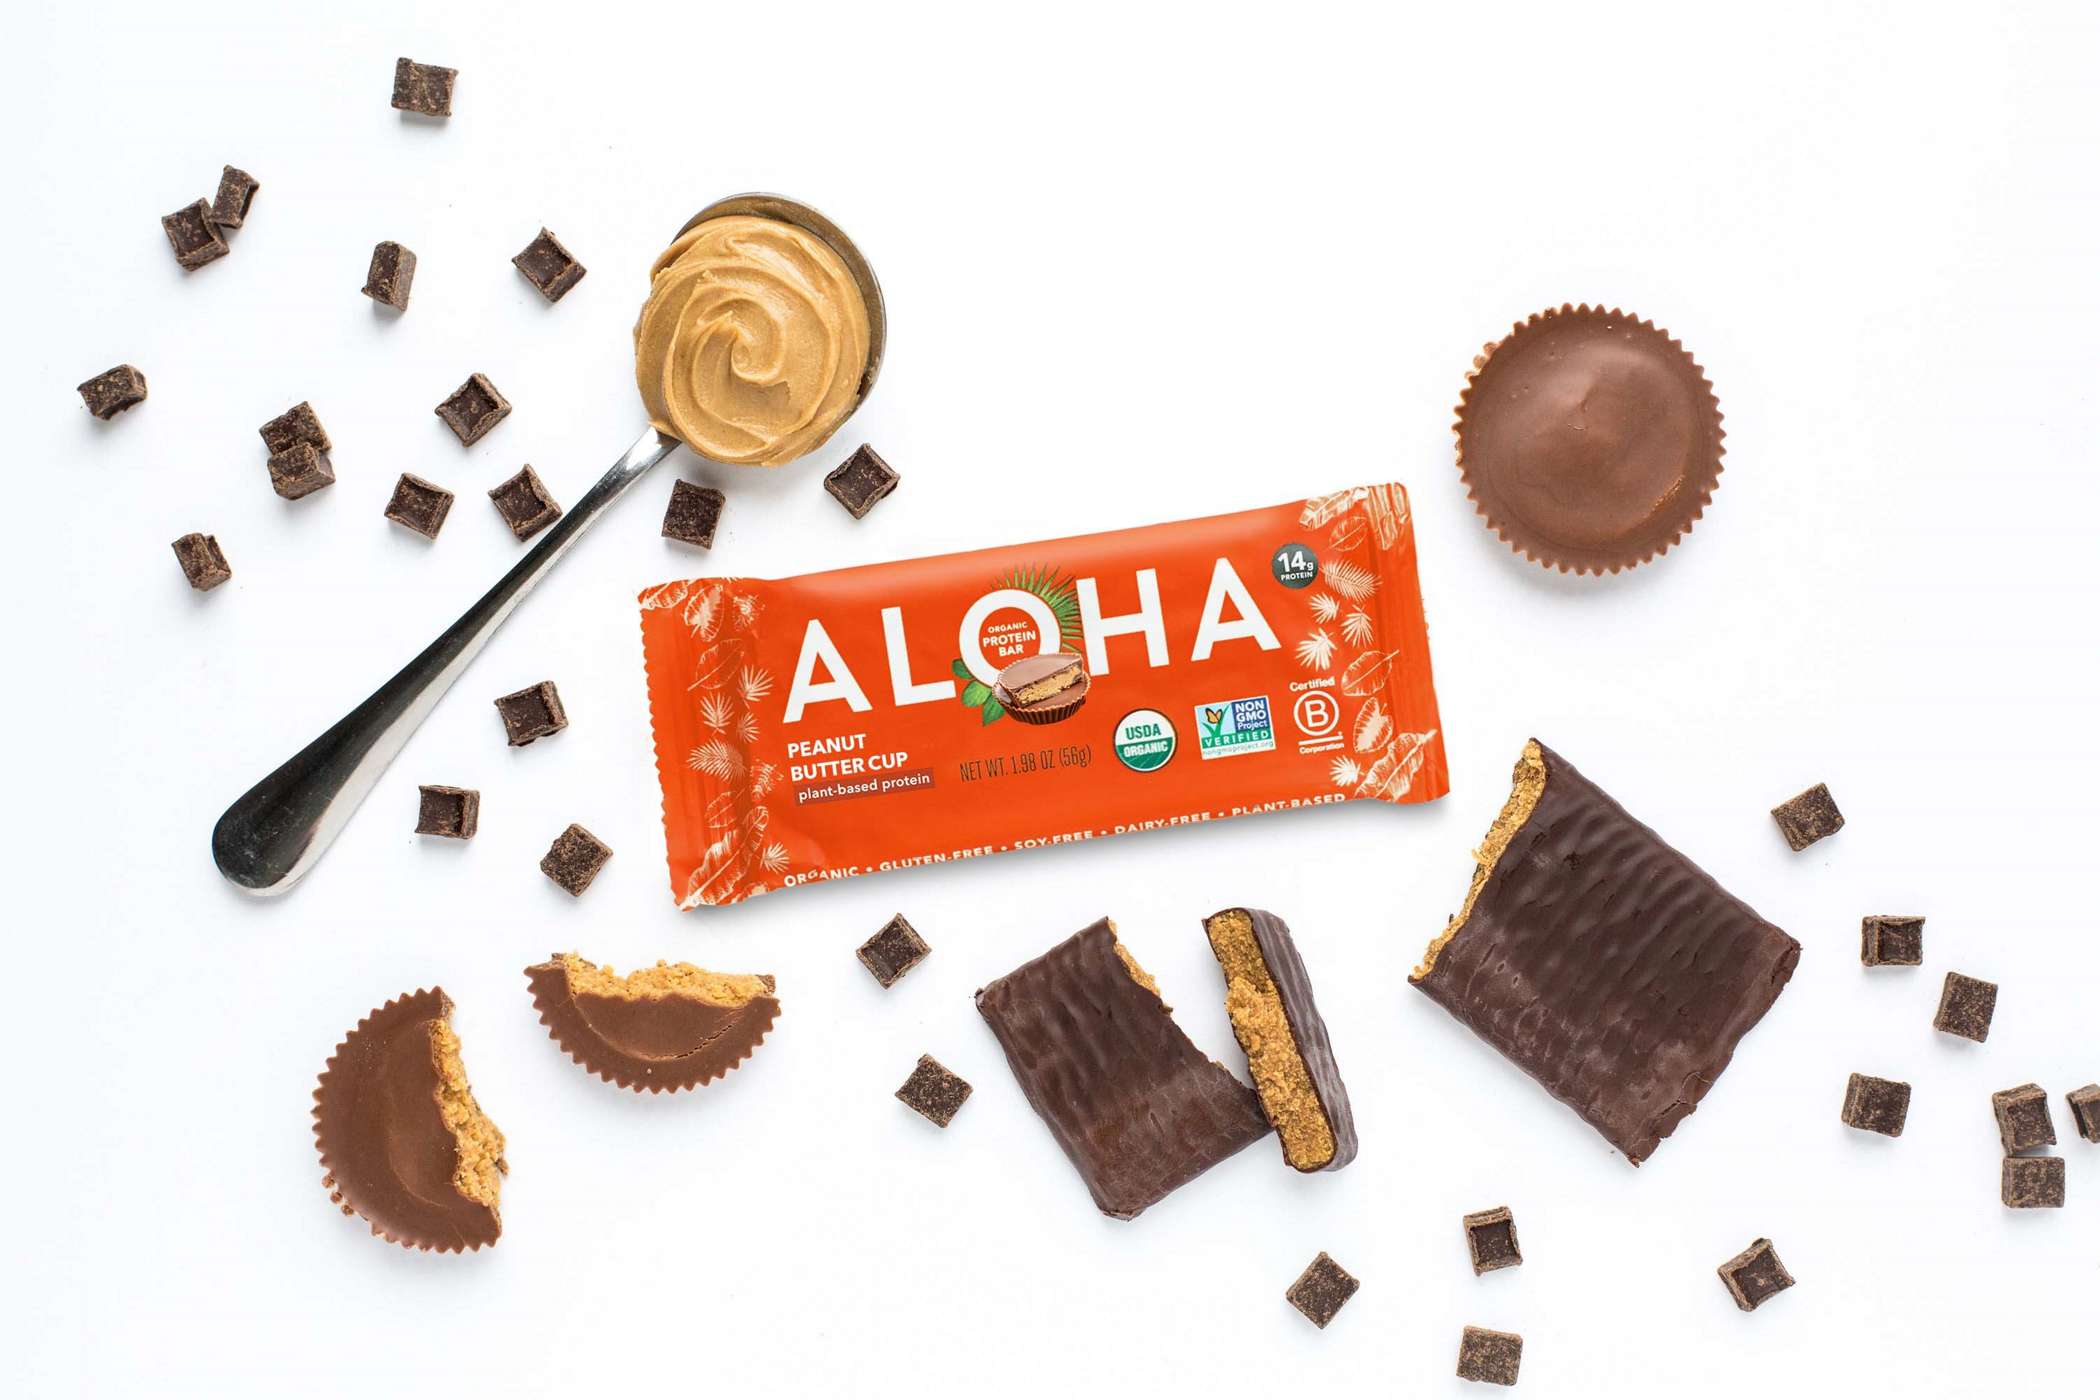 Aloha 14g Protein Bar - Peanut Butter Cup; image 2 of 4